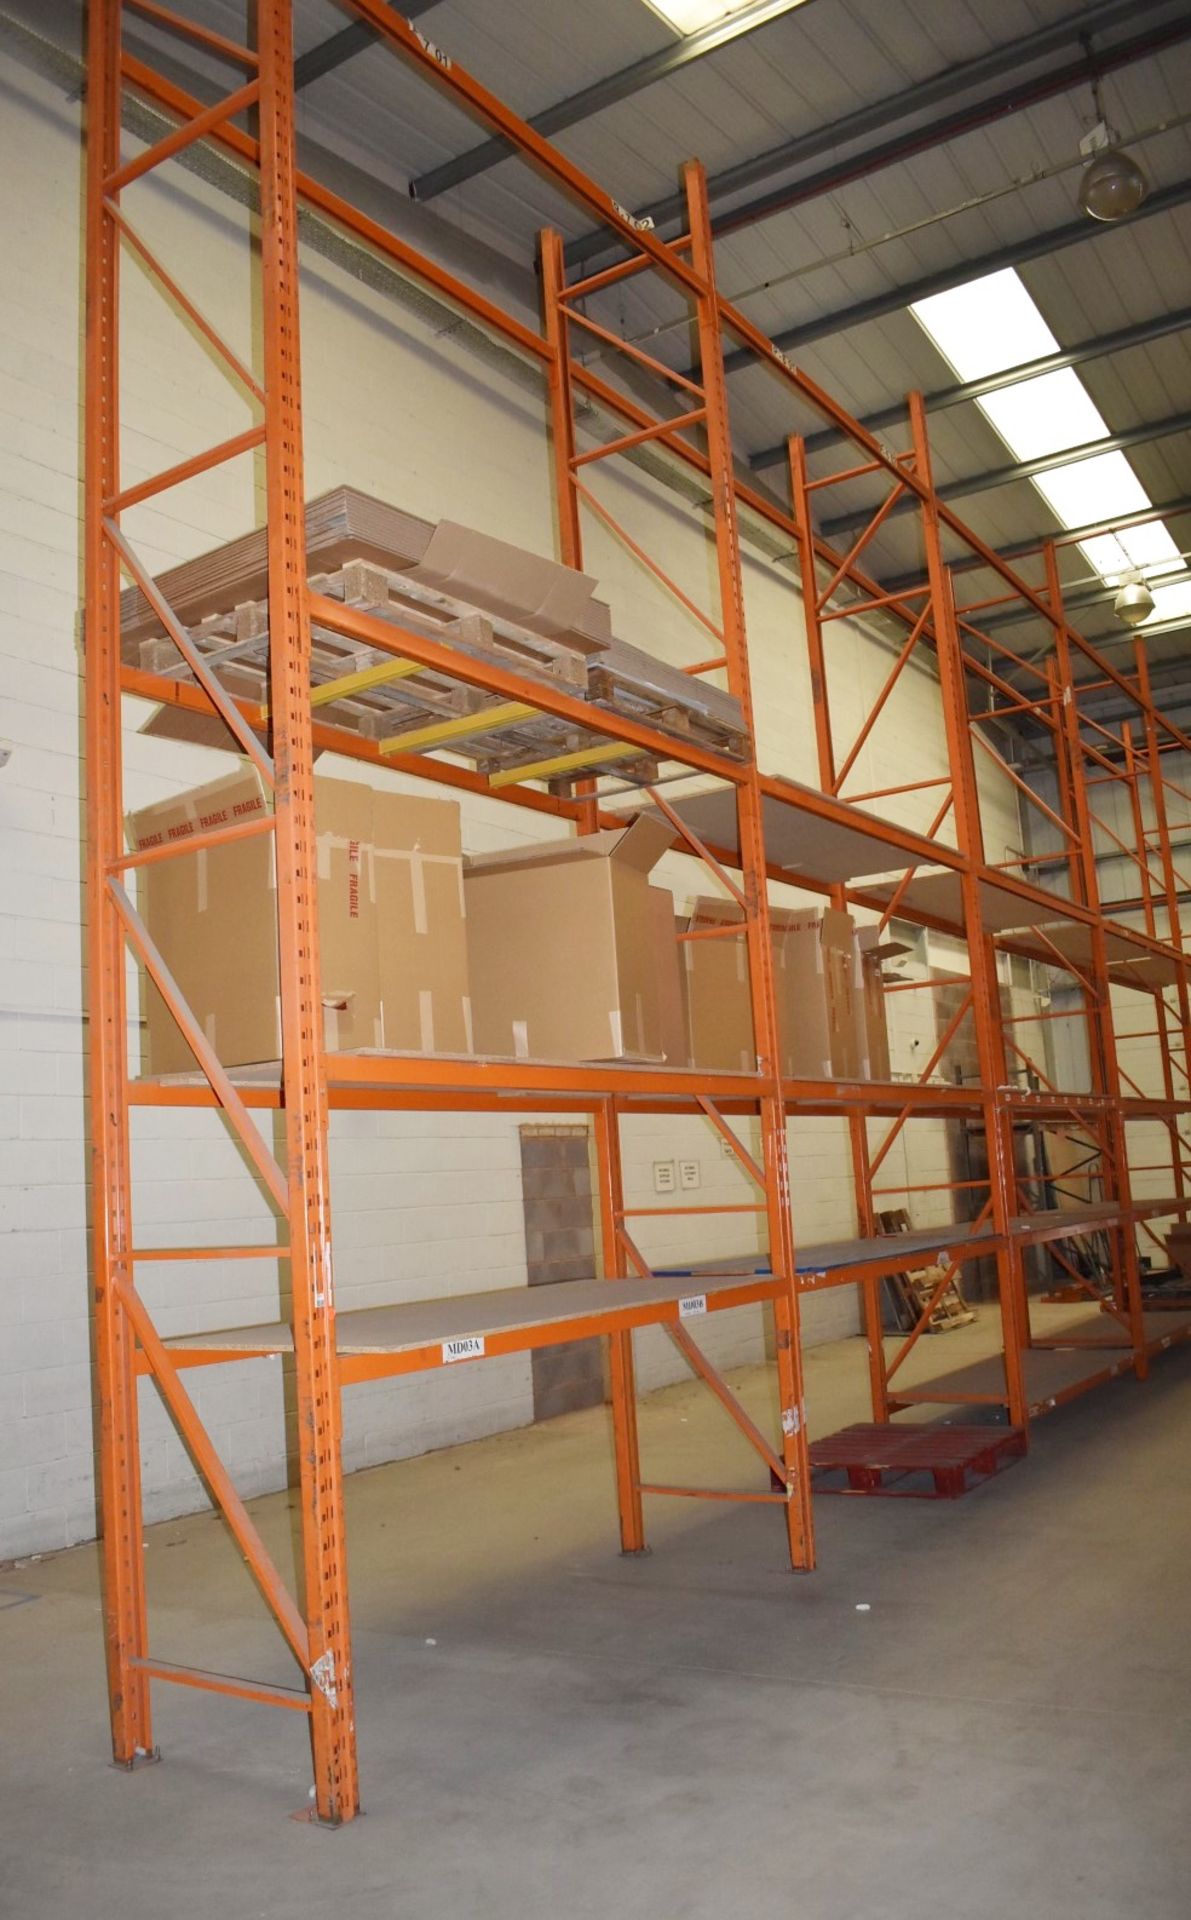 5 x Bays of RediRack Warehouse Pallet Racking - Lot Includes 6 x Uprights and 38 x Crossbeams - - Image 4 of 4